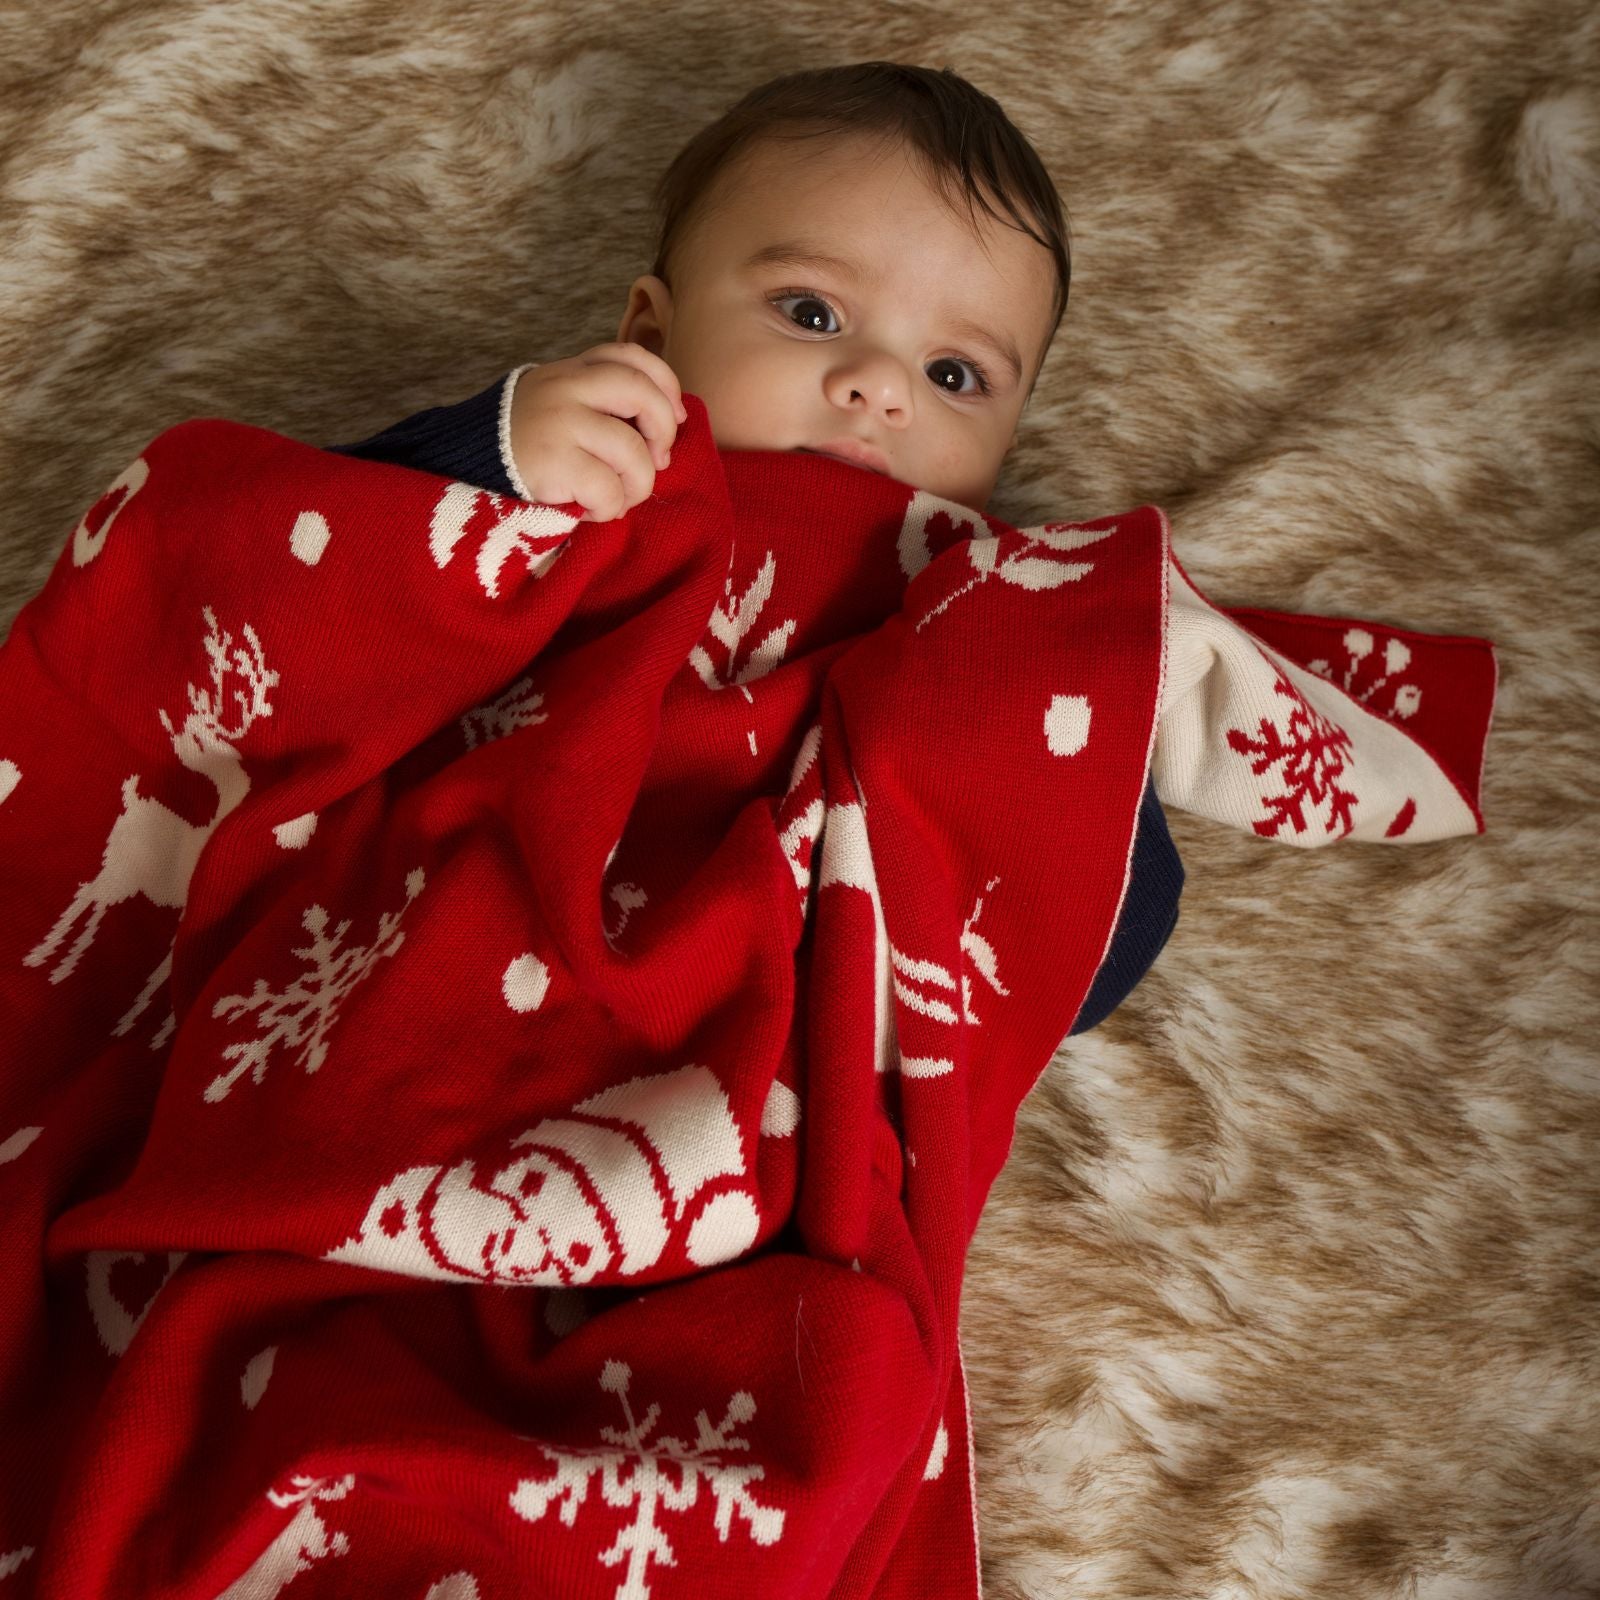 Merry Christmas Reversable Jacquard Blanket - Deep Red and White (80 x 100 cms)